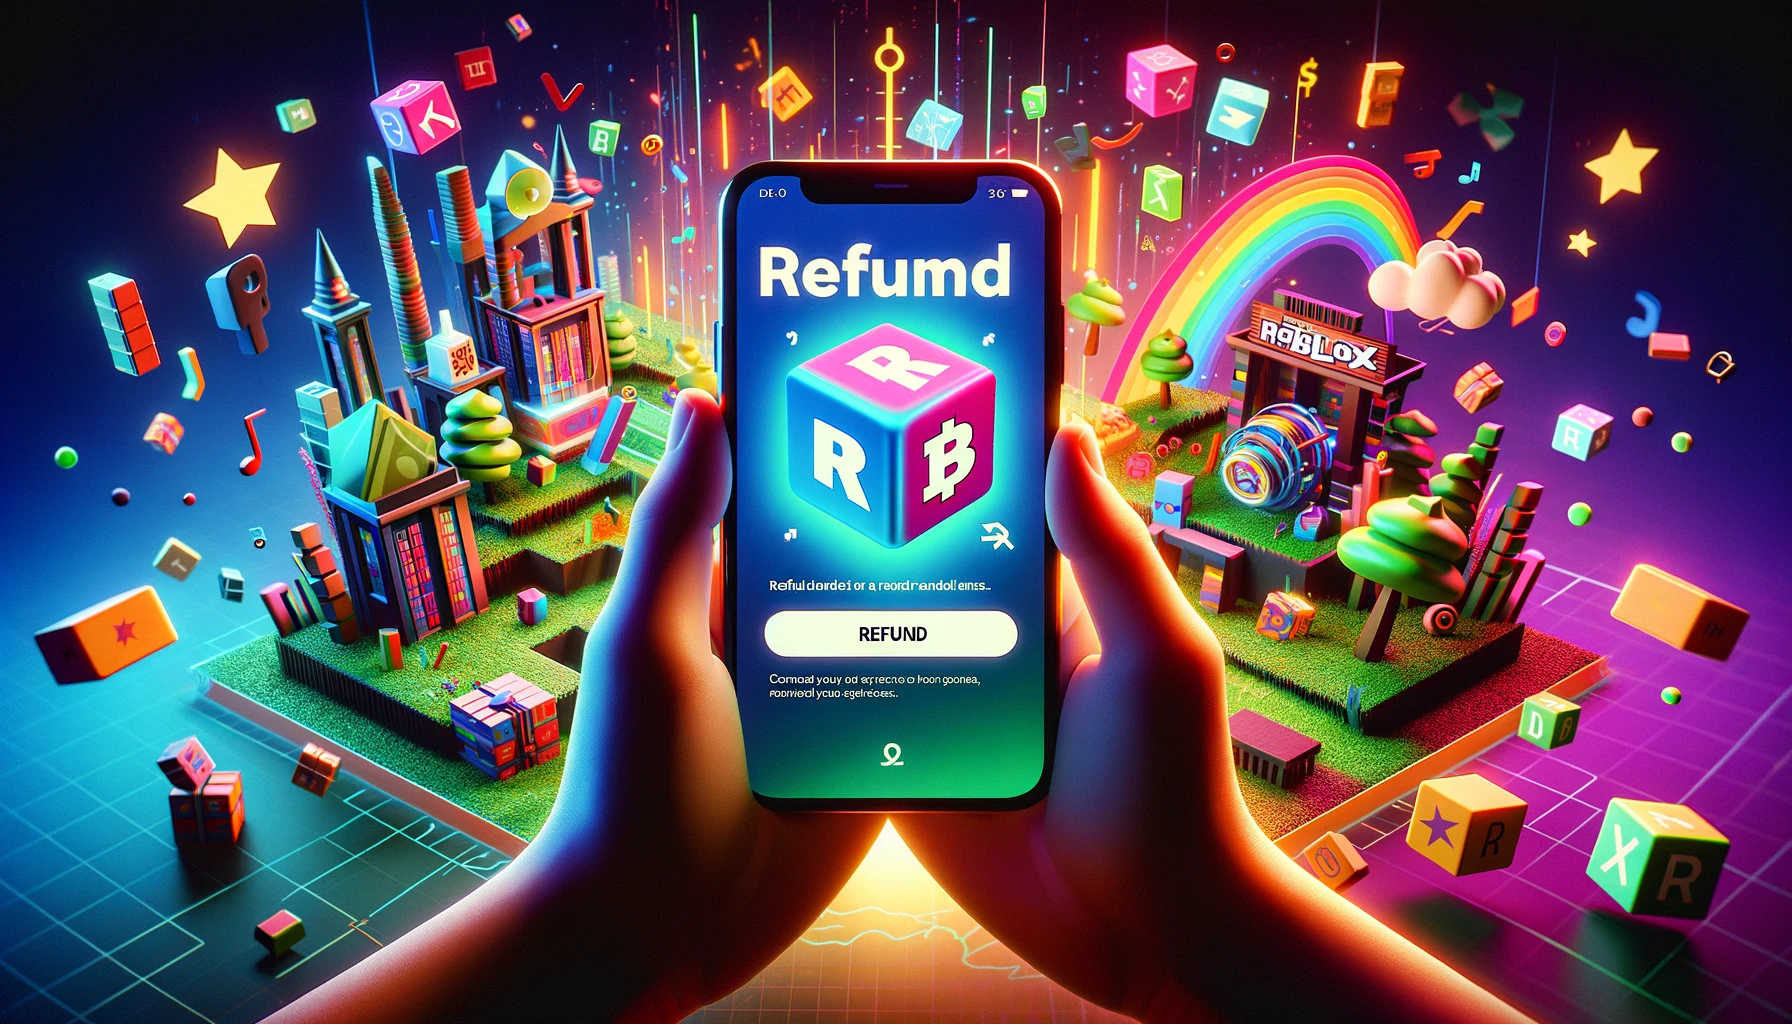 How to Refund Roblox Items on Mobile